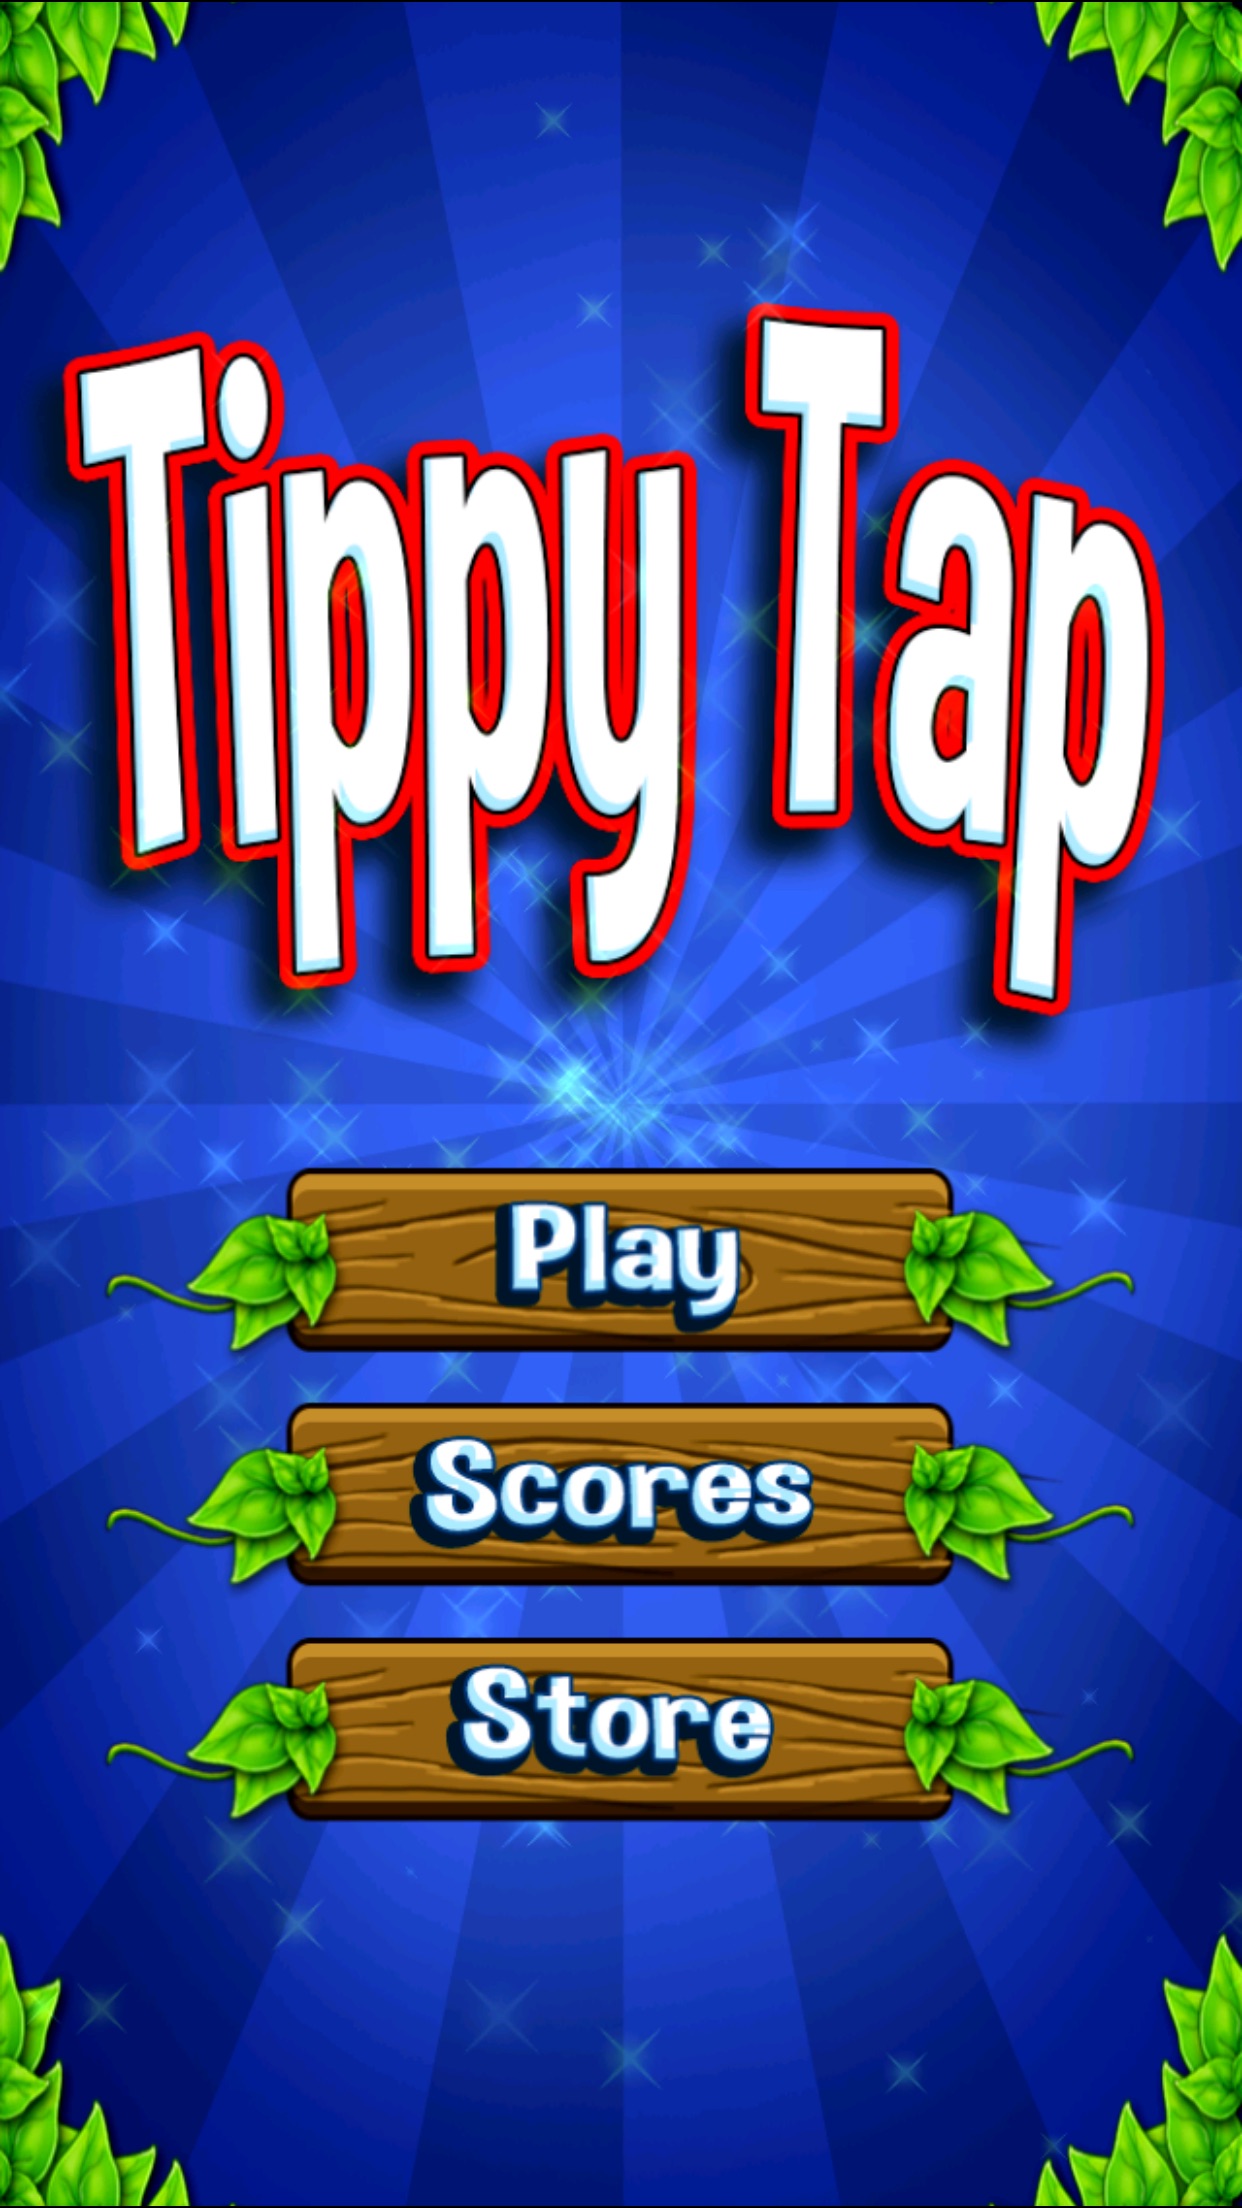 Tippy Tap Hack Online (Buy50000coinsRemoveAds, Buy50000Coins)